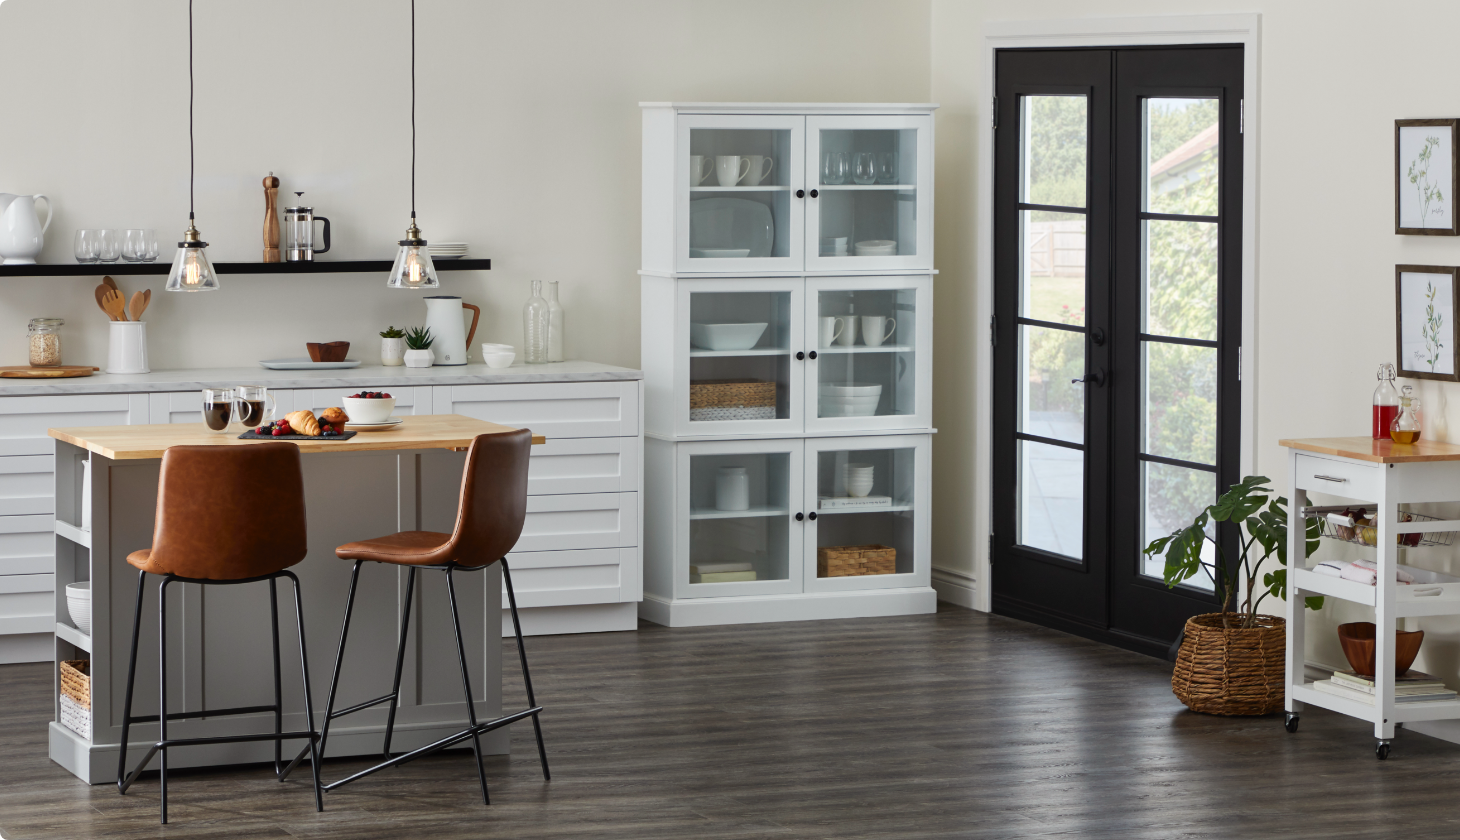 White, black, and brown kitchen with two leather bar stools, white cabinet, and black shelf